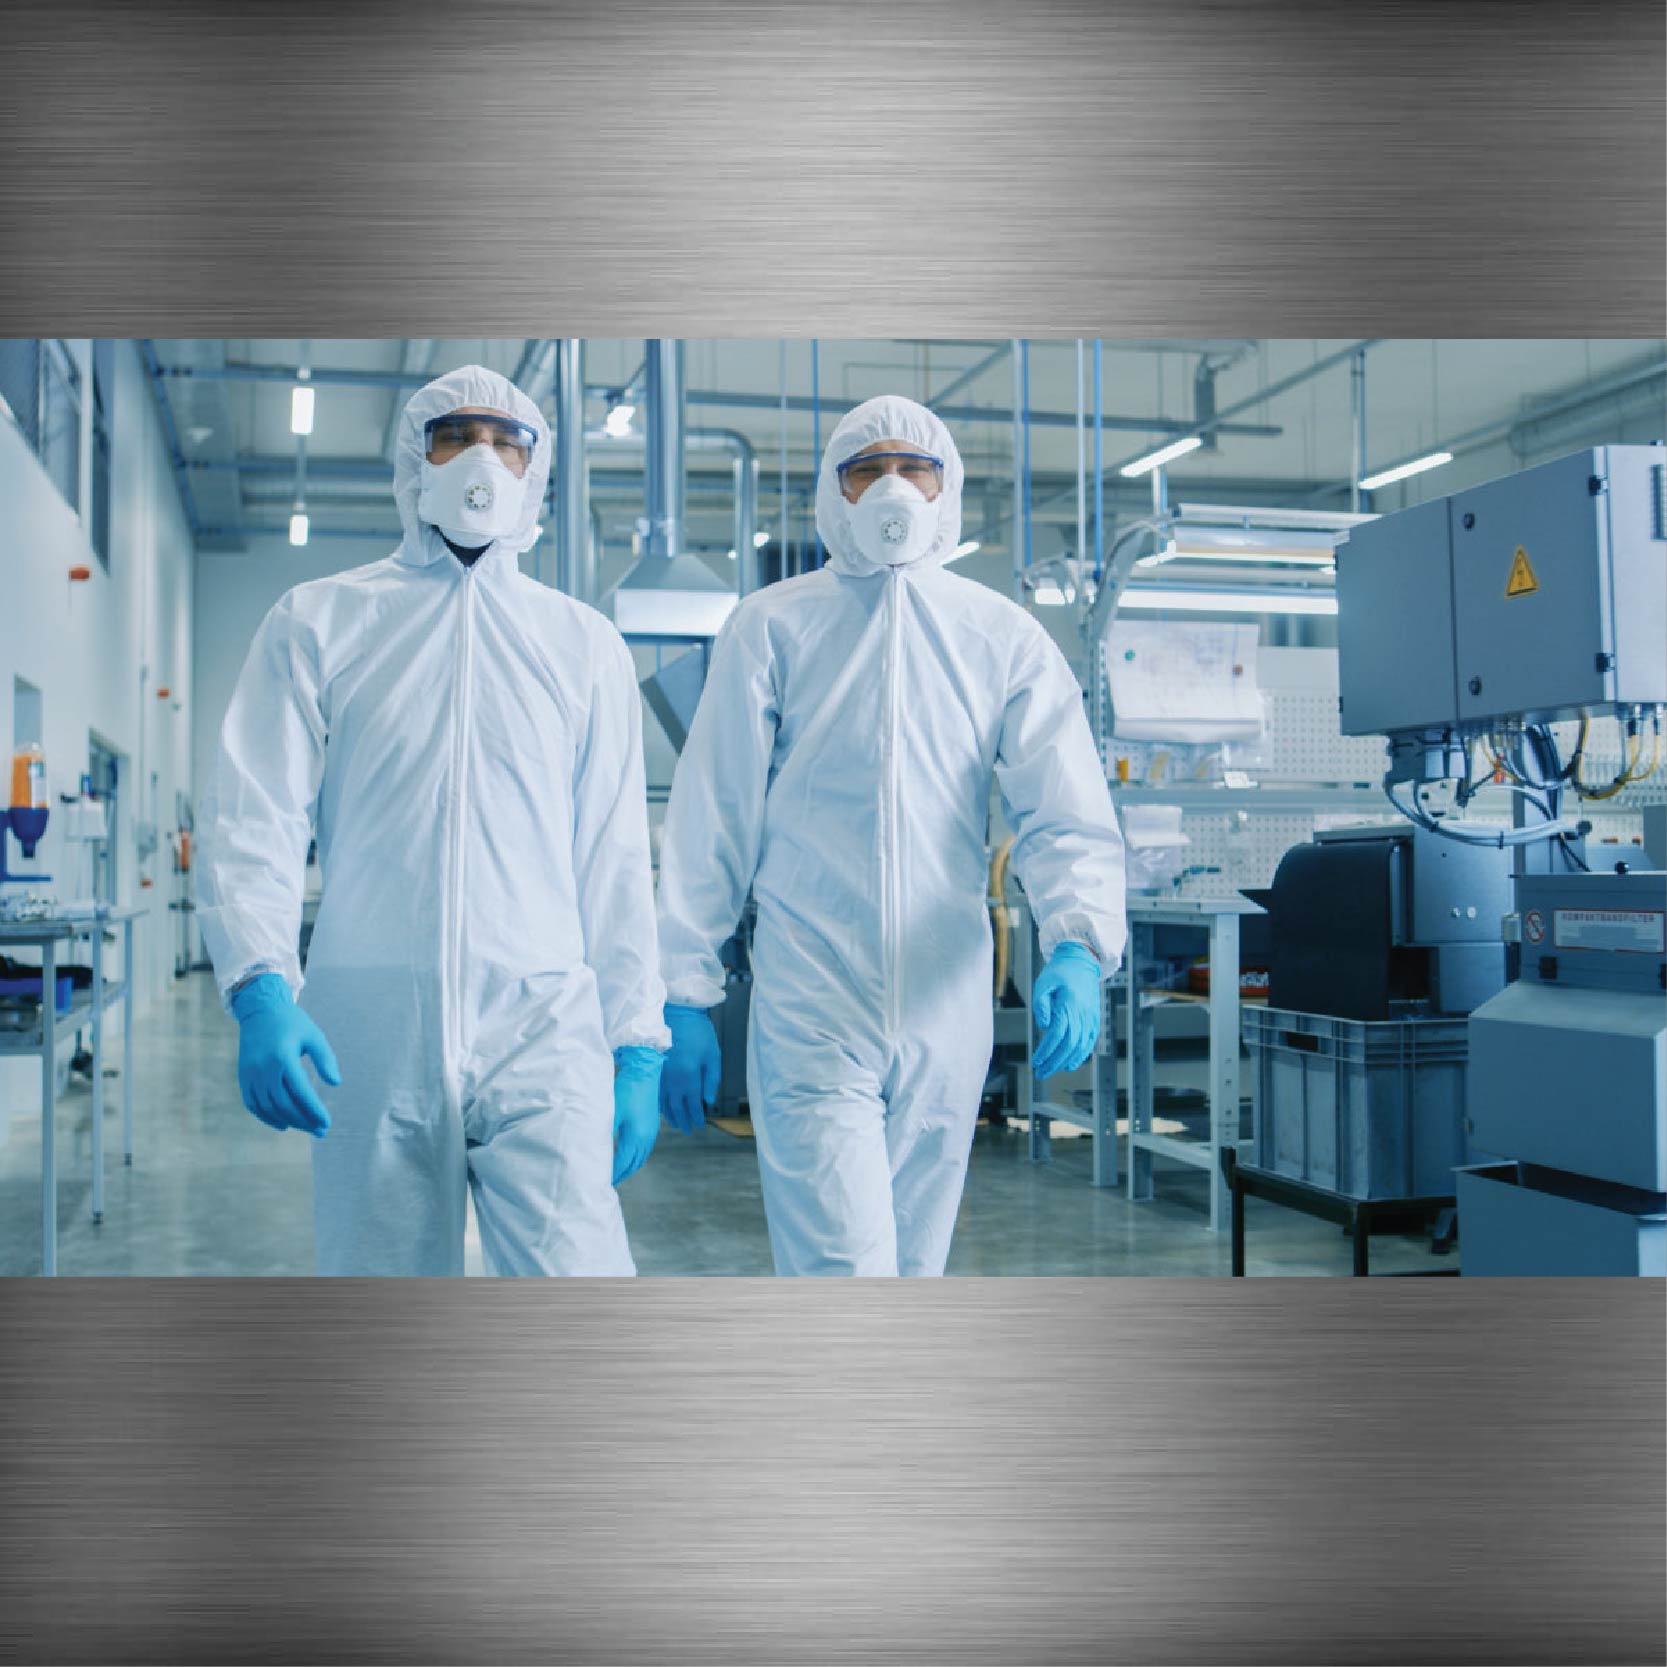 How Do The Cleanrooms Operate?